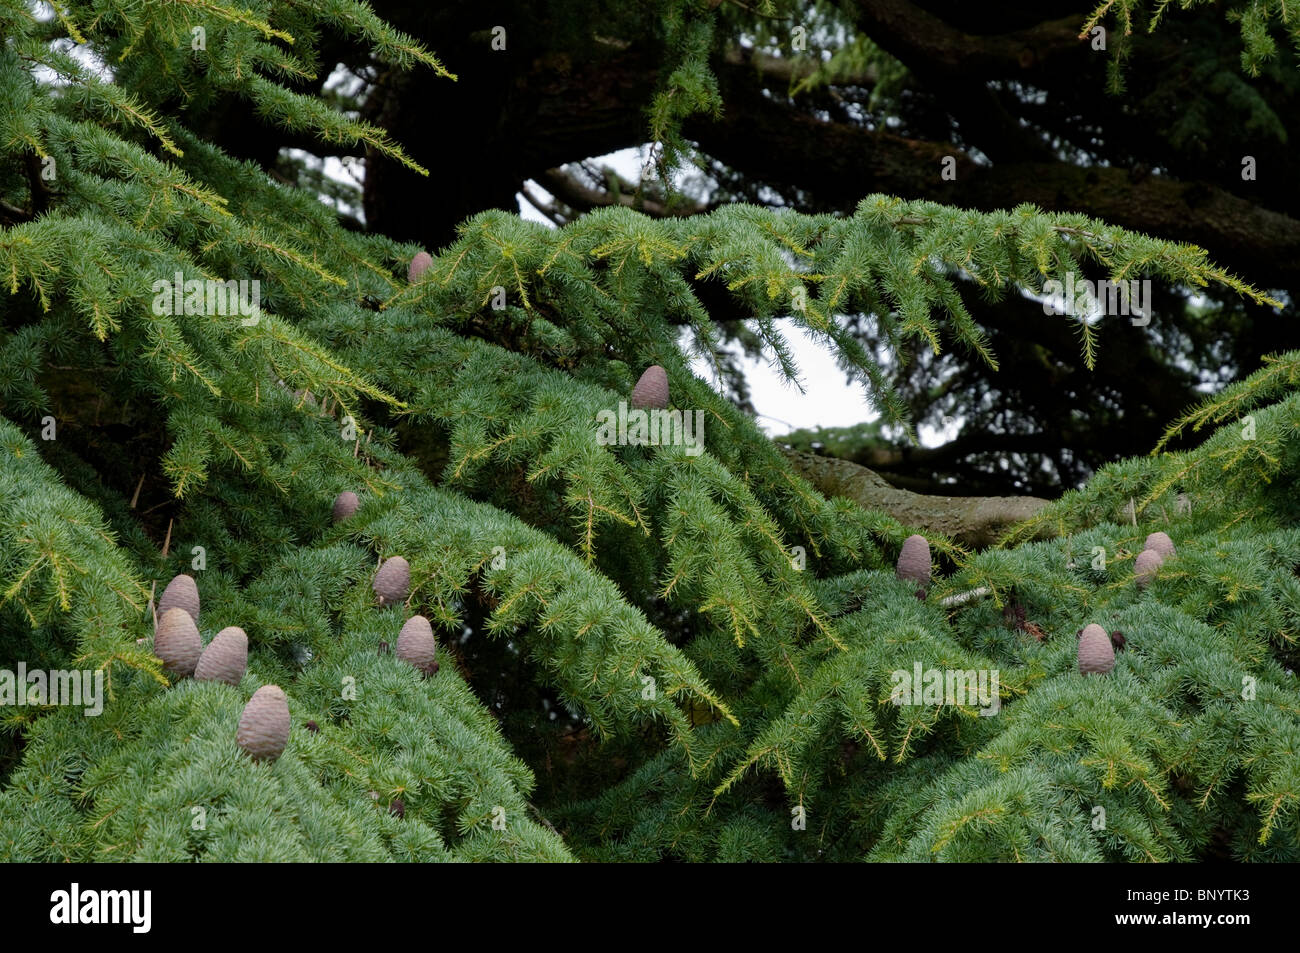 Cedar of Lebanon / Cedrus Libani - a stately feature tree. Close up showing branches with their distinctive cones. Stock Photo